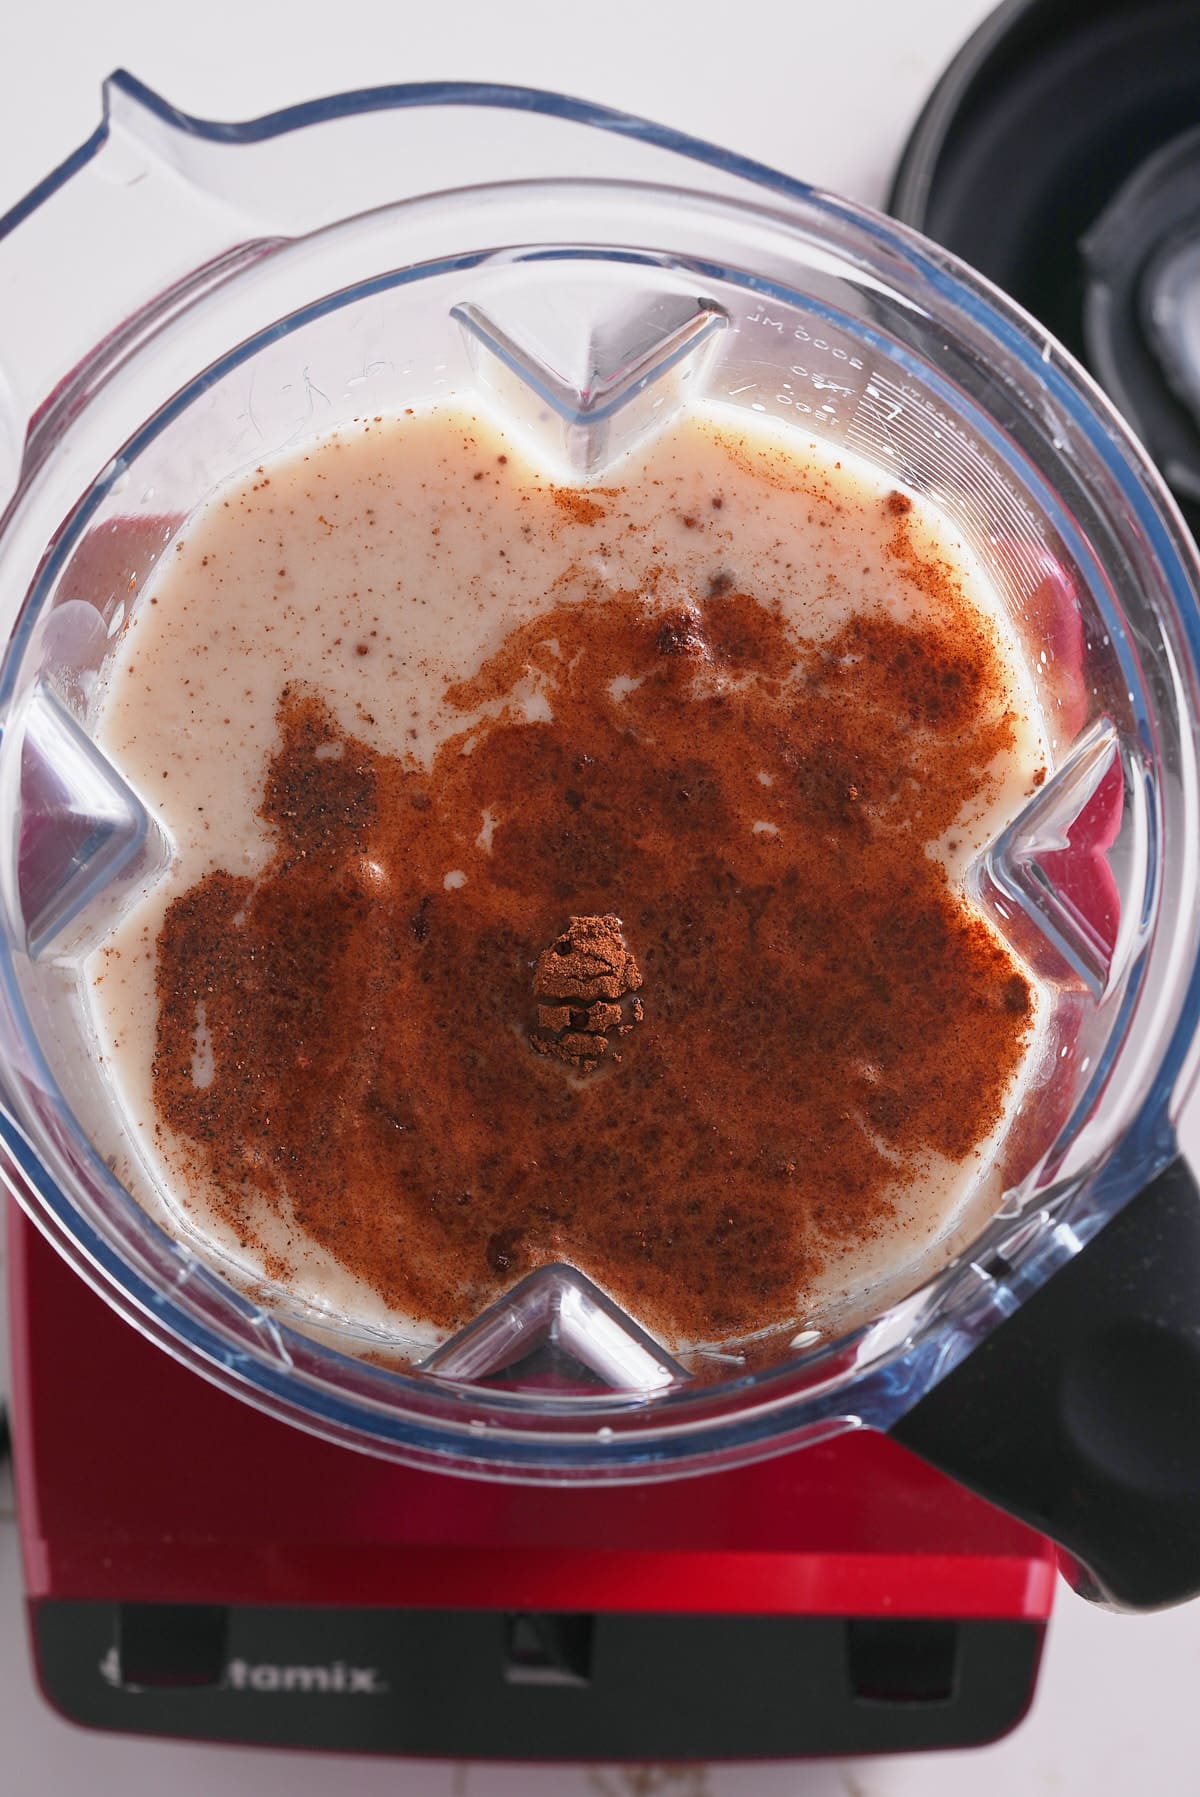 All ingredients are added to the blender for the coquito.